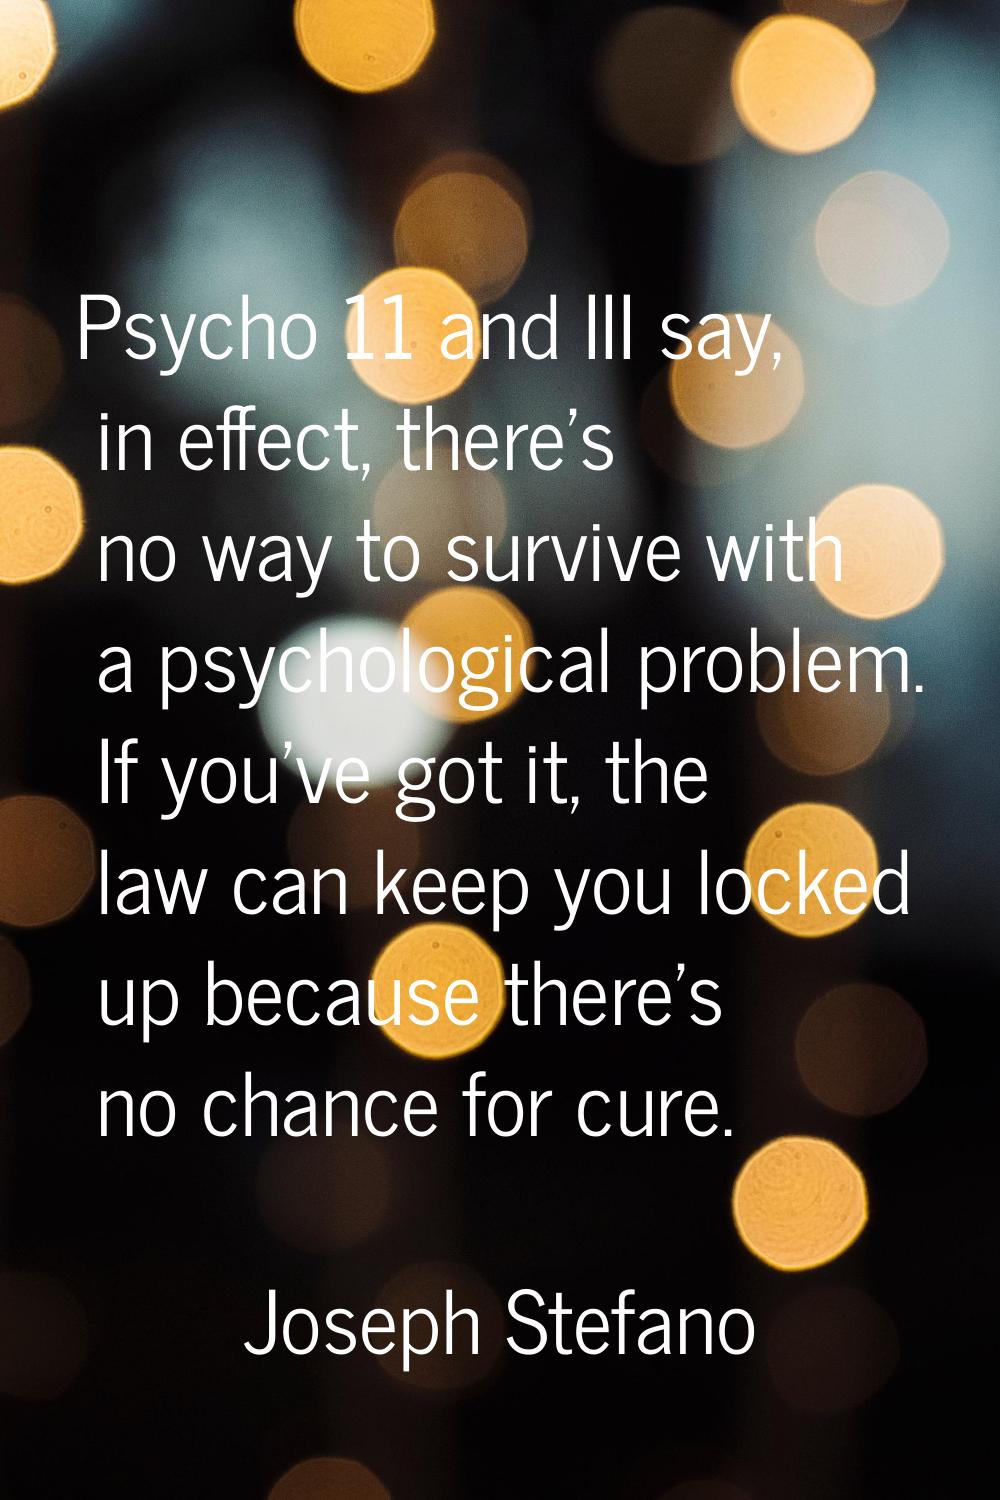 Psycho 11 and III say, in effect, there's no way to survive with a psychological problem. If you've